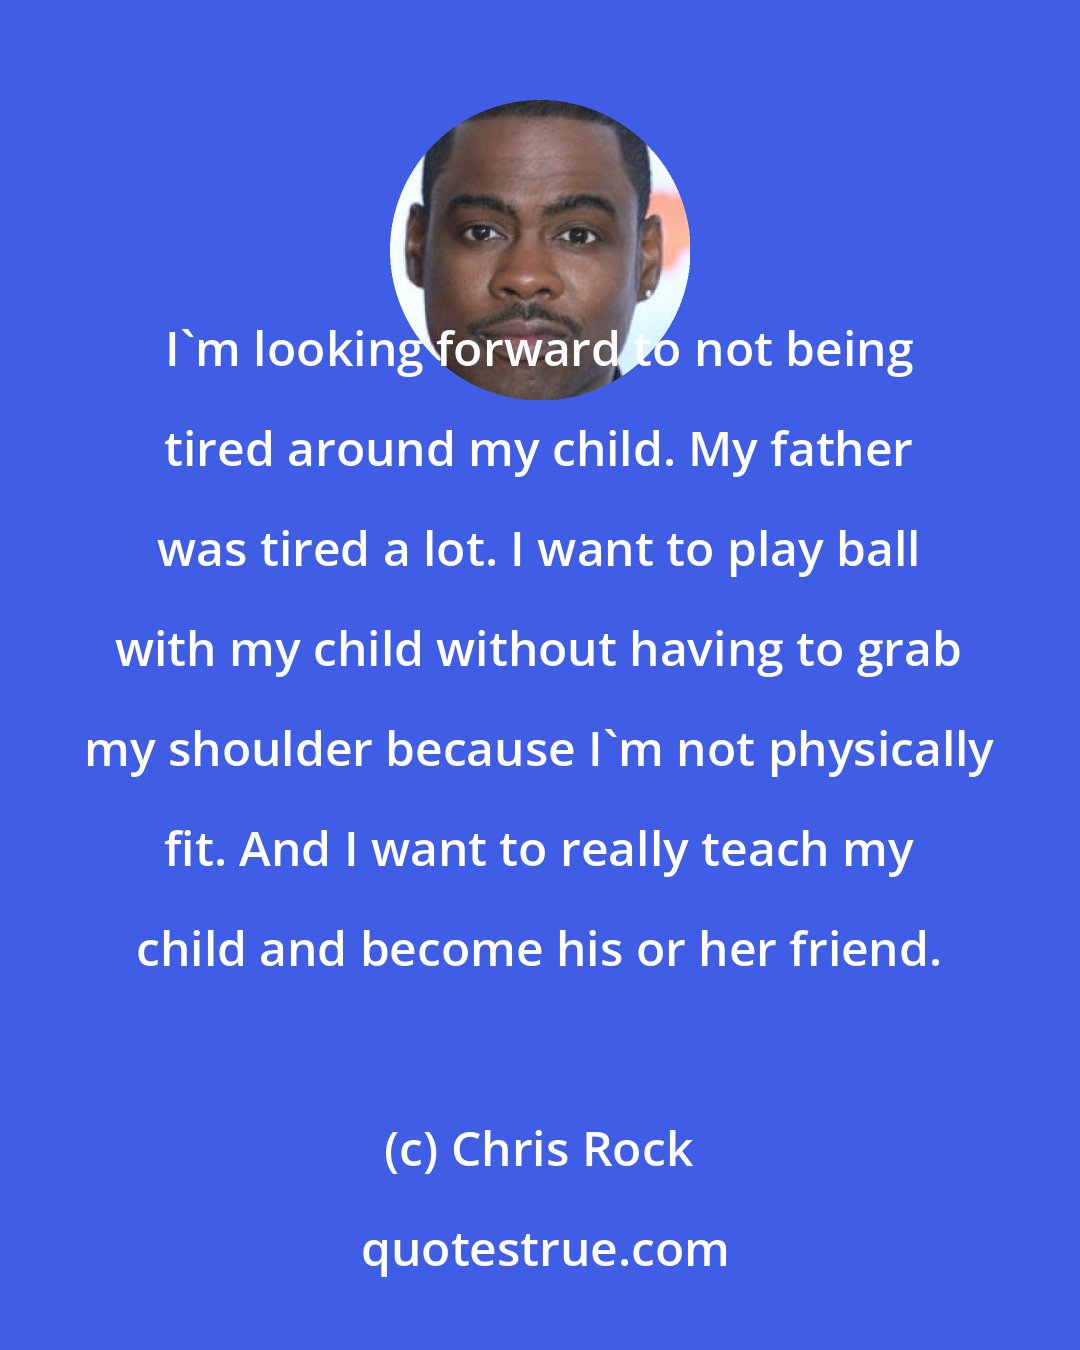 Chris Rock: I'm looking forward to not being tired around my child. My father was tired a lot. I want to play ball with my child without having to grab my shoulder because I'm not physically fit. And I want to really teach my child and become his or her friend.